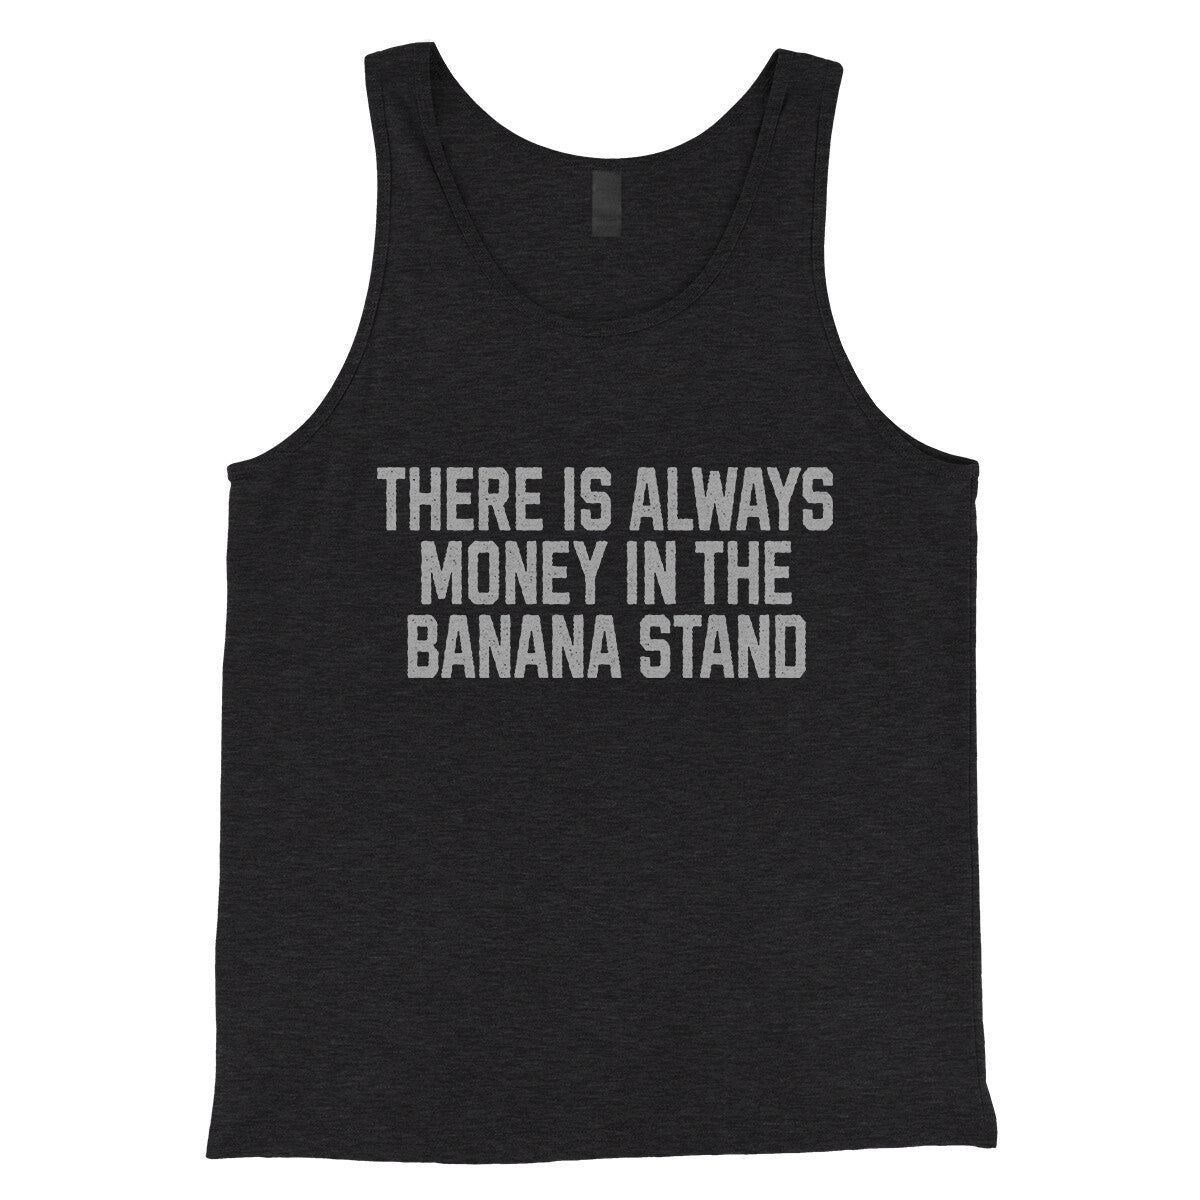 There is Always Money in the Banana Stand in Charcoal Black TriBlend Color